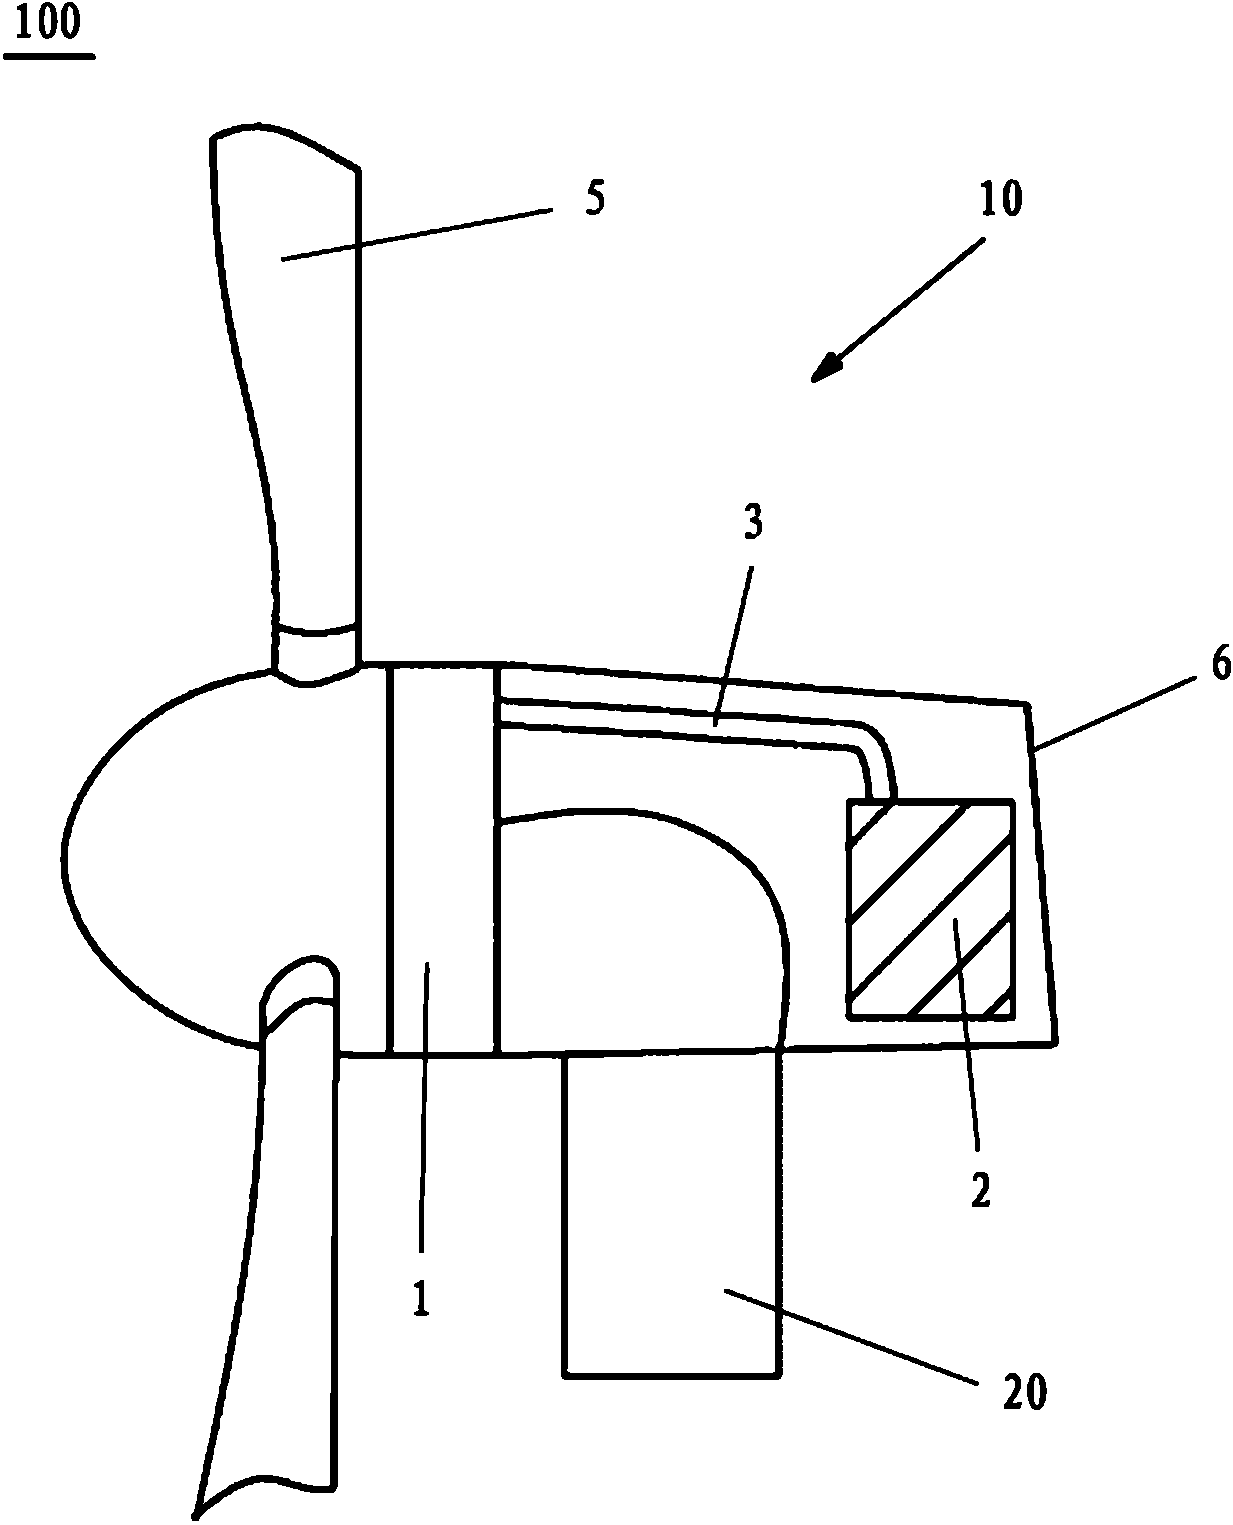 Radiation structure of wind driven generator